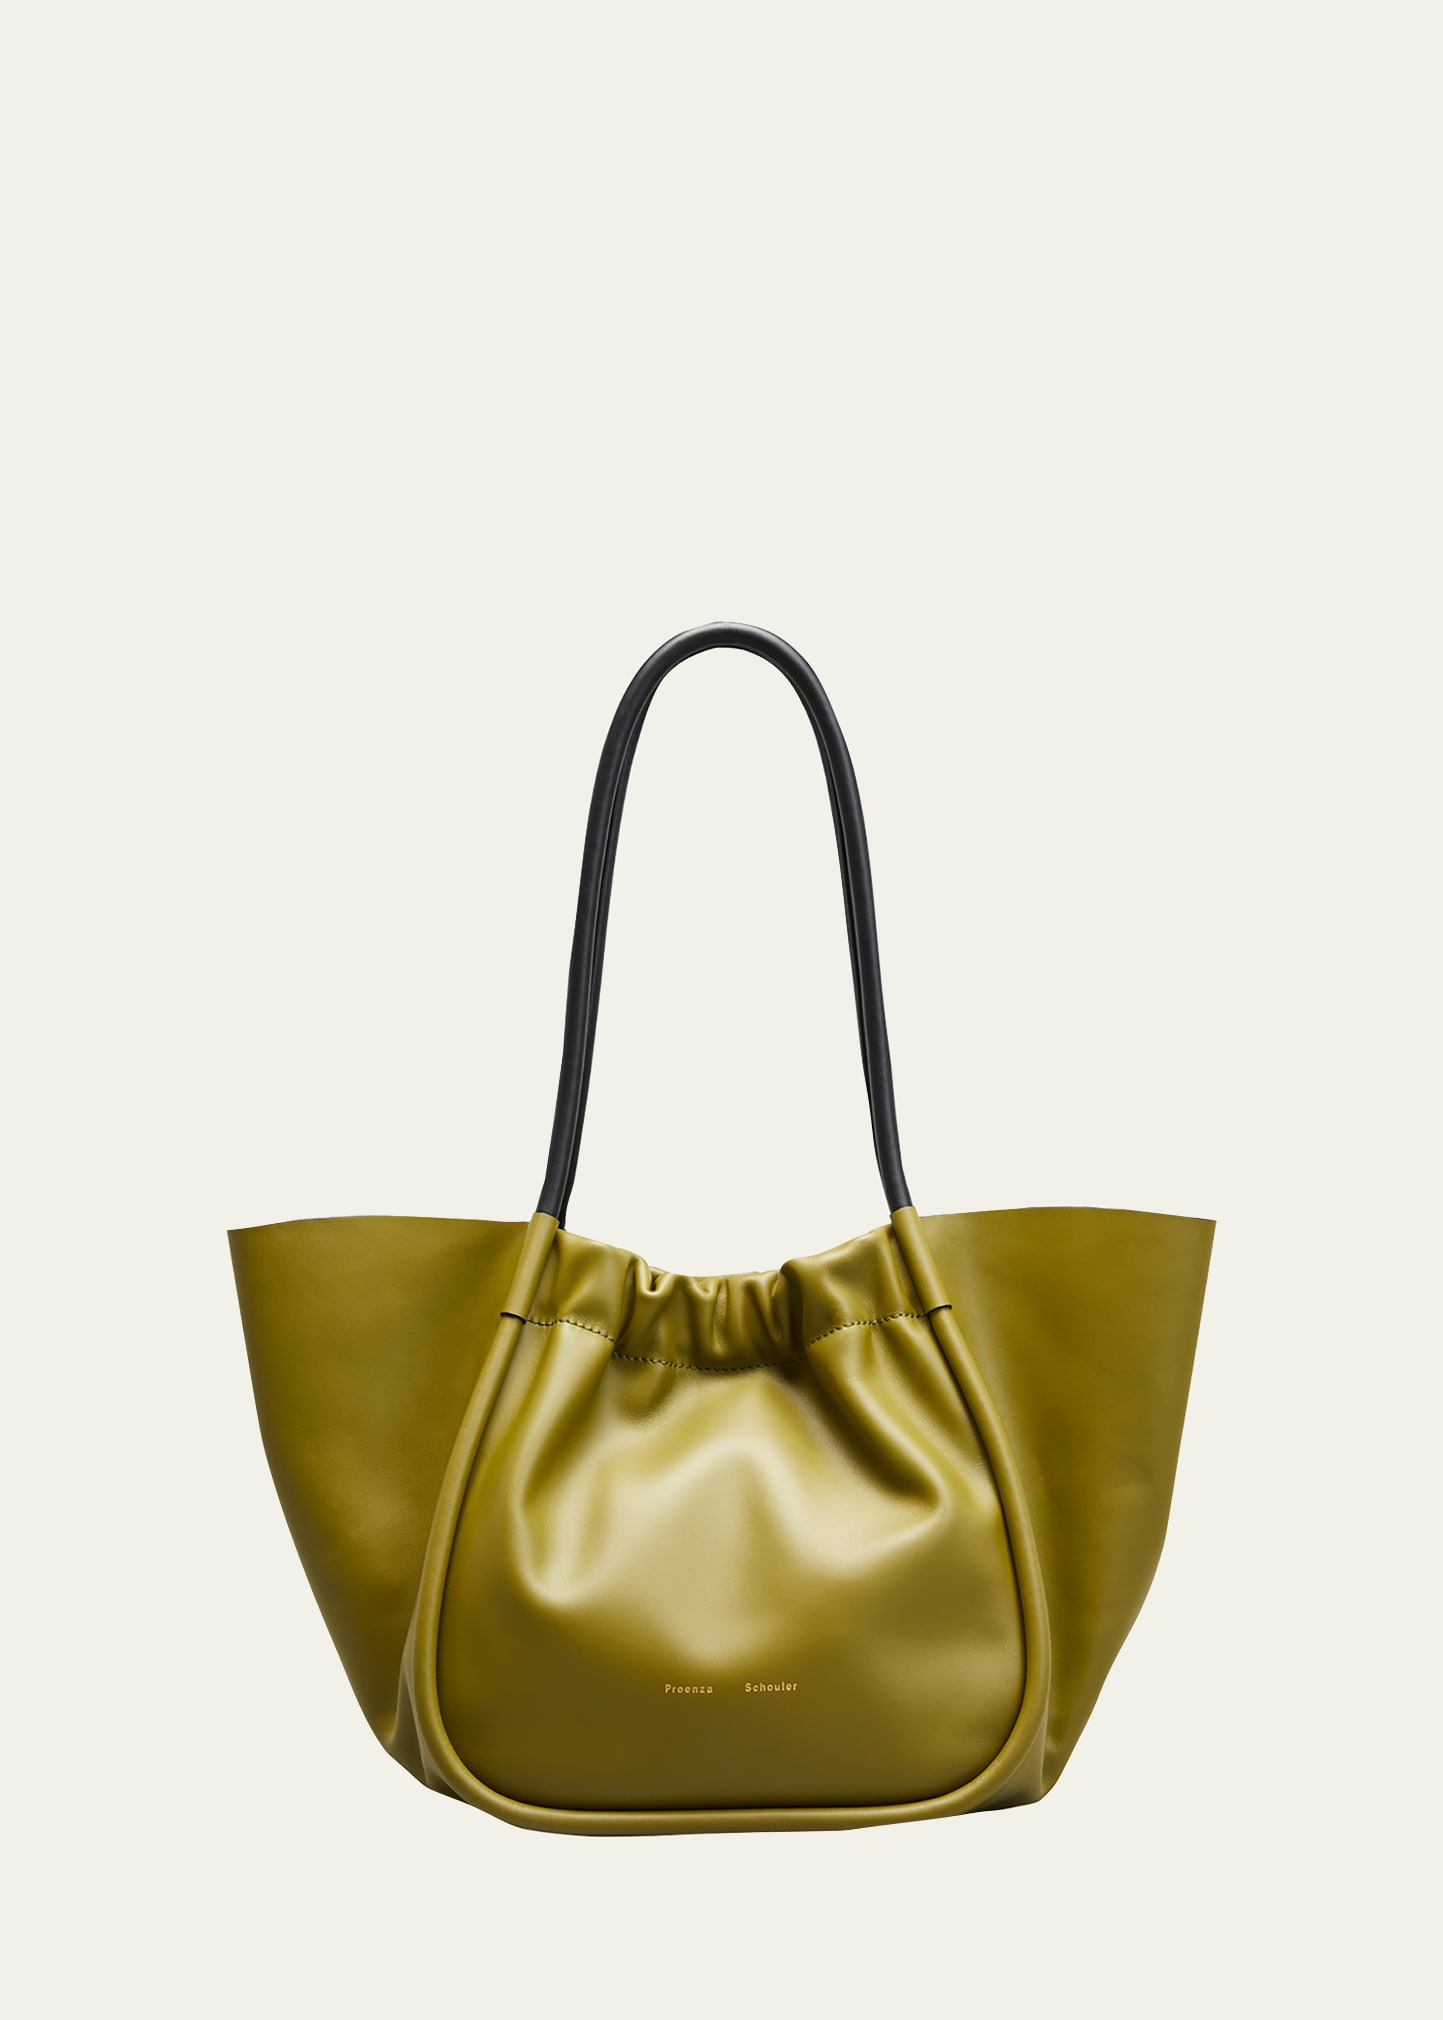 Proenza Schouler Large Ruched Smooth Leather Tote Bag